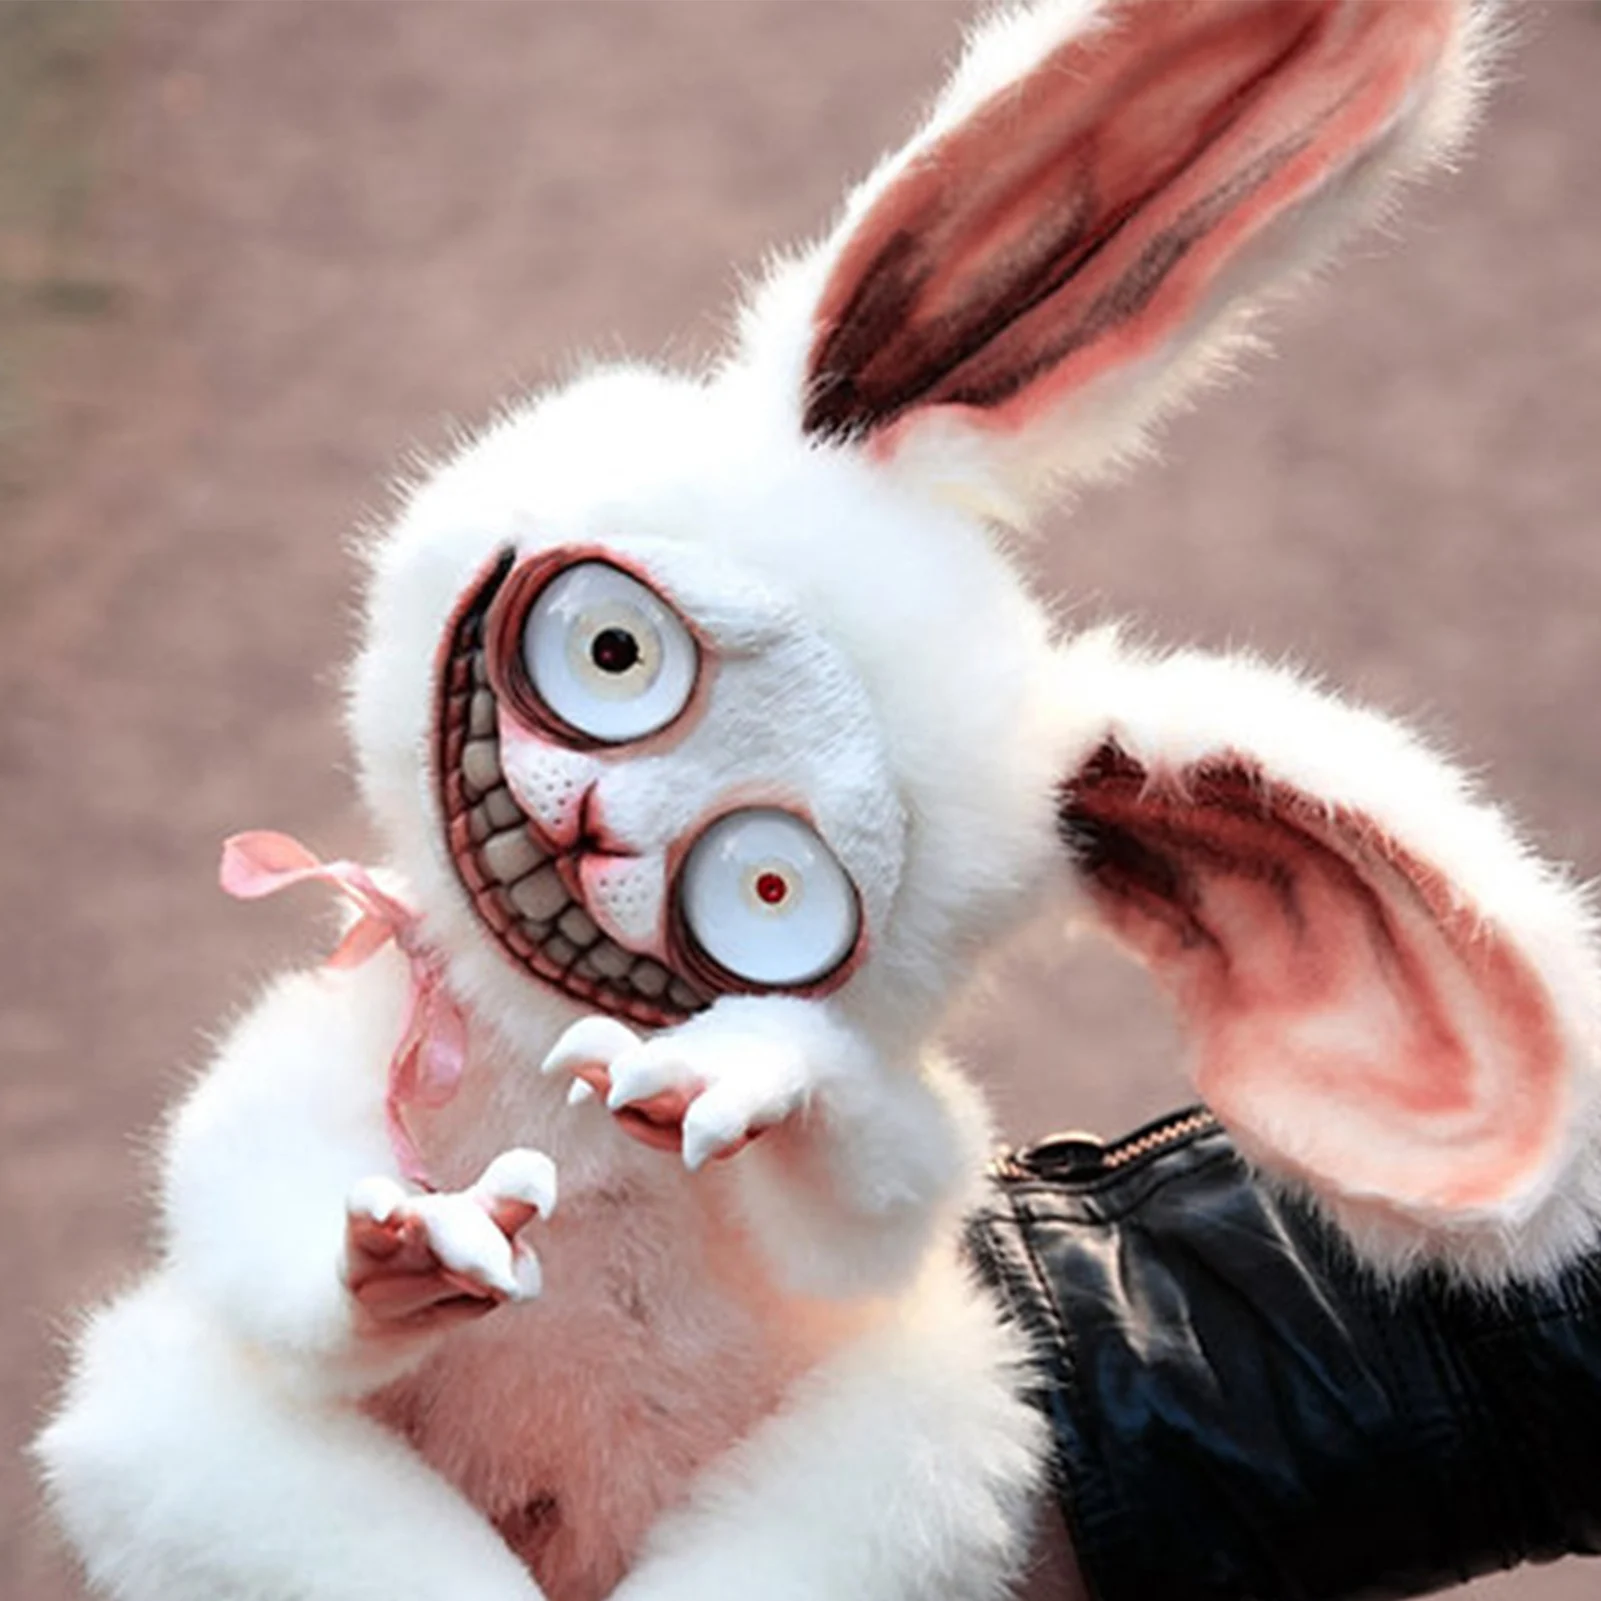 

15cm Scary Bunny Doll Crazy Bunny Plush Toy Horror Game Stuffed Rabbit Toys Birthday Gifts For Children Kids Simulation Rabbits